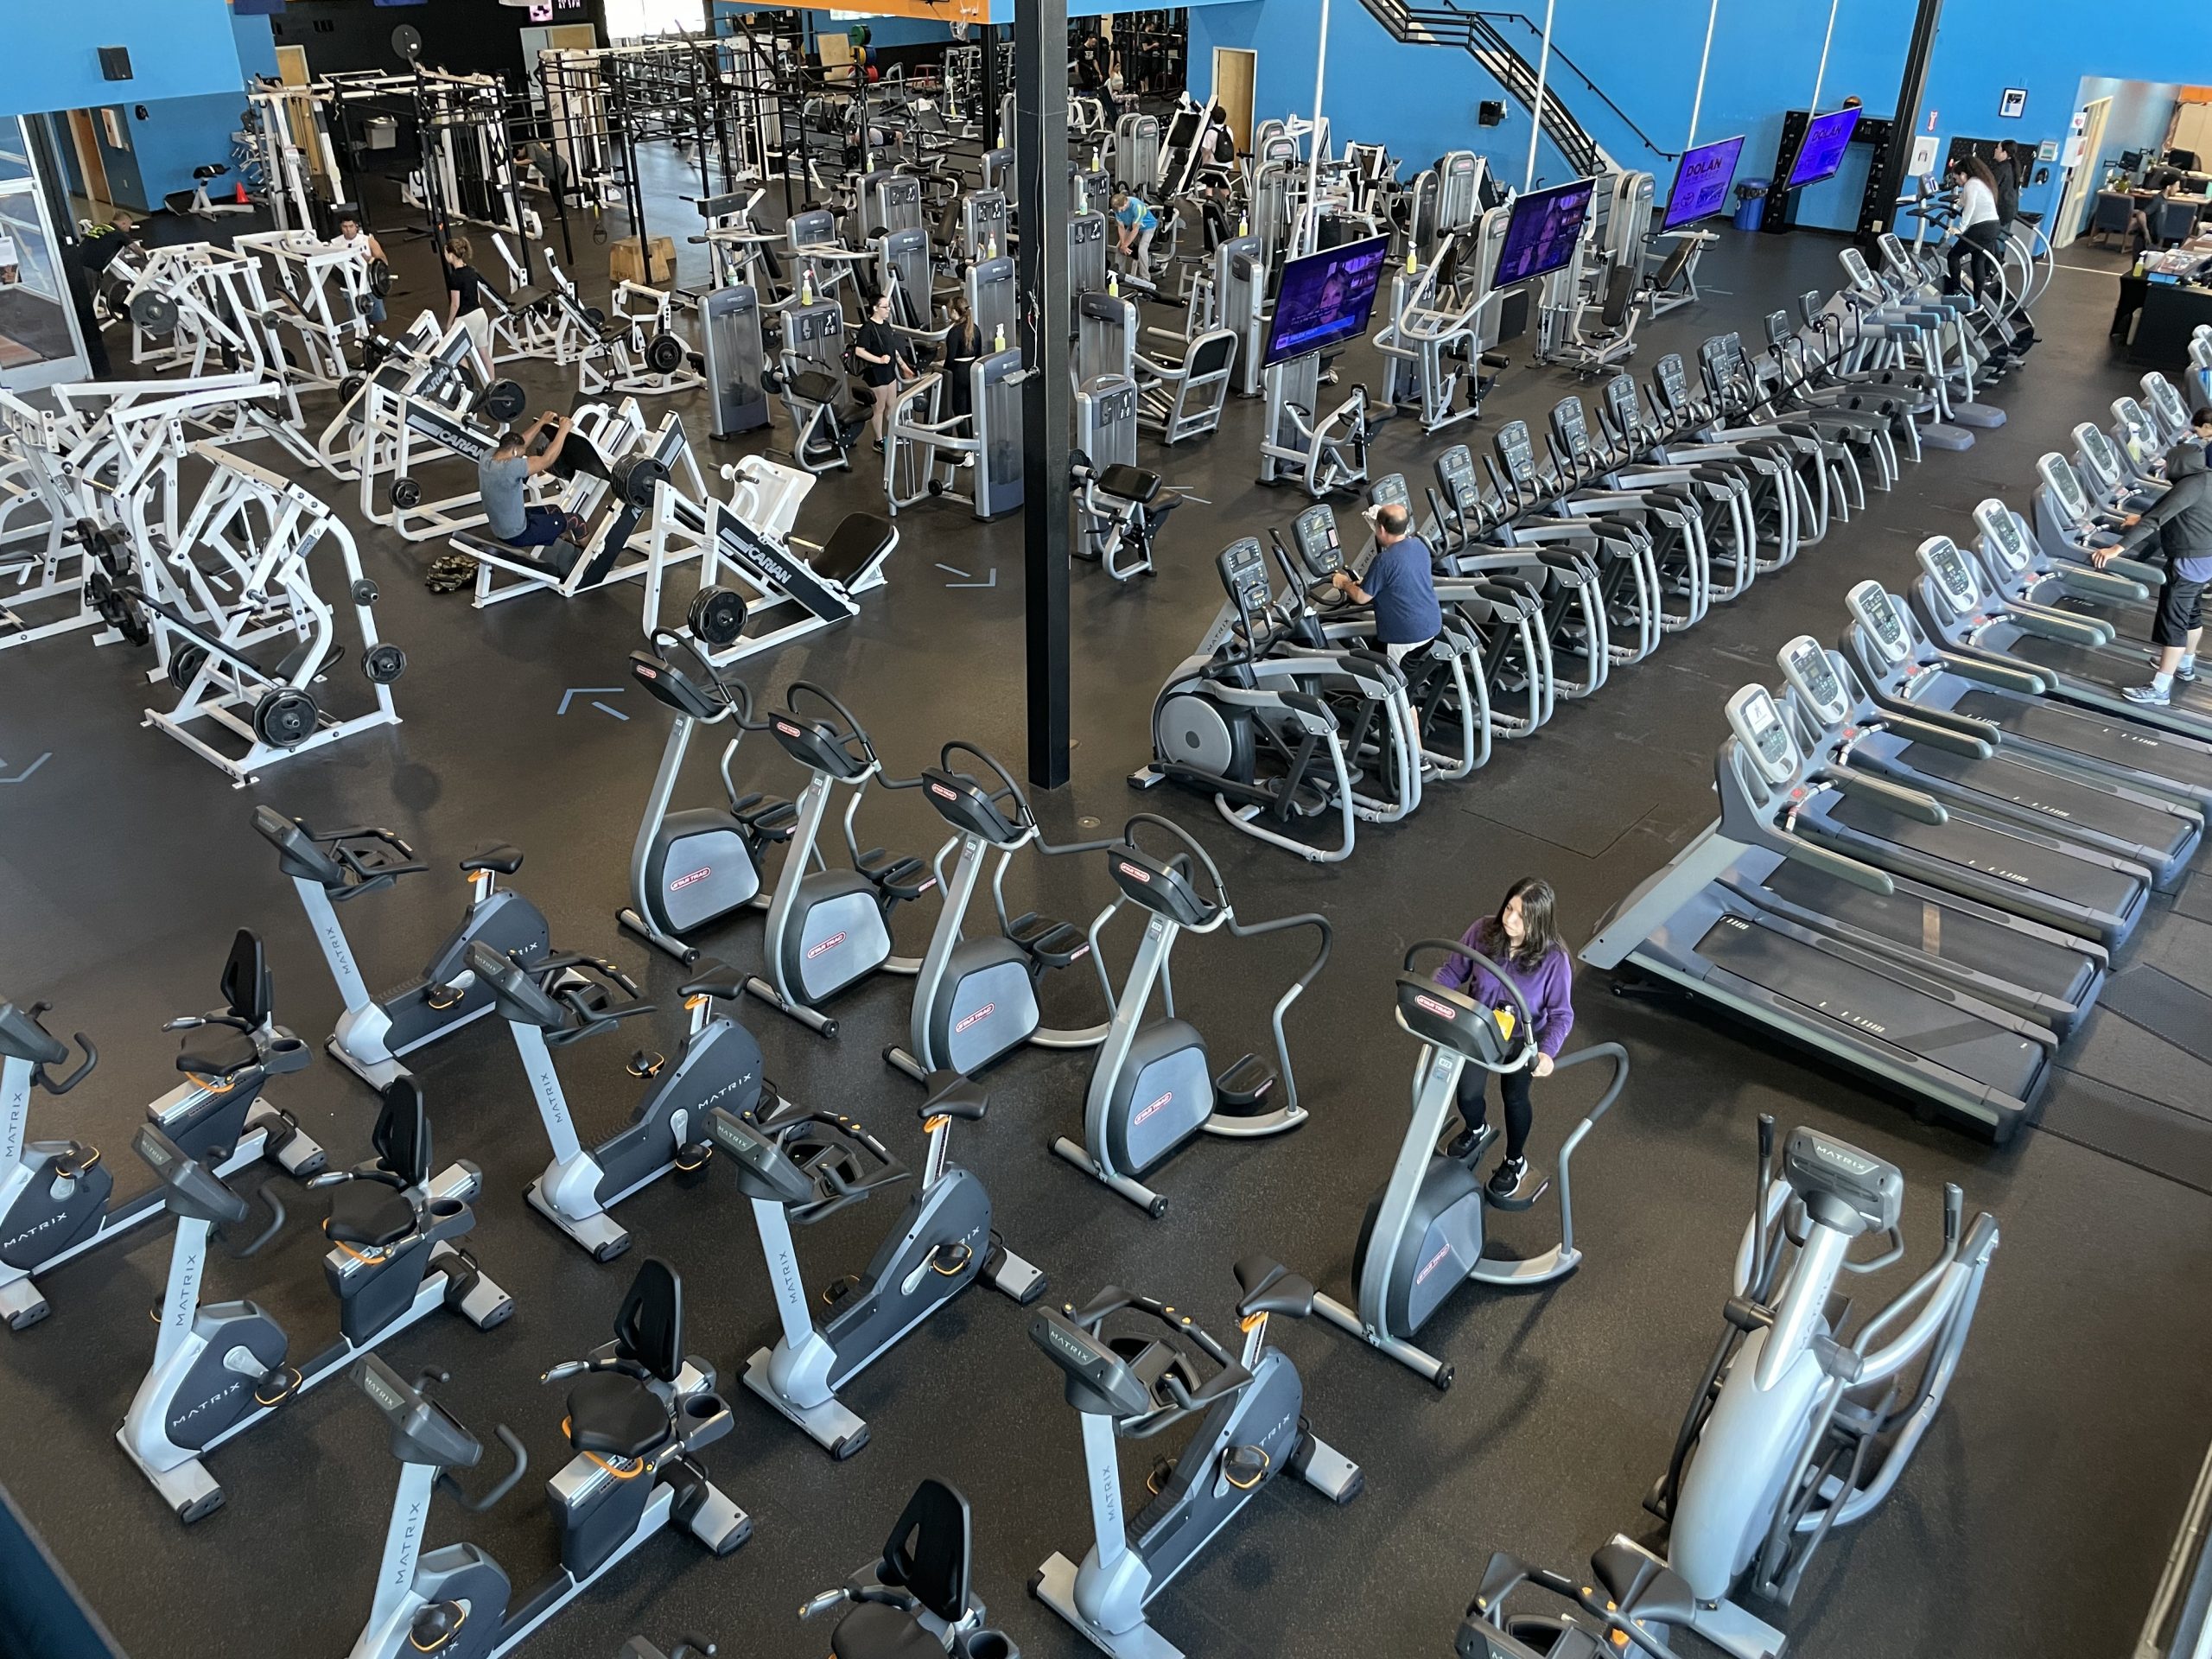 fitness connection sparks holiday hours